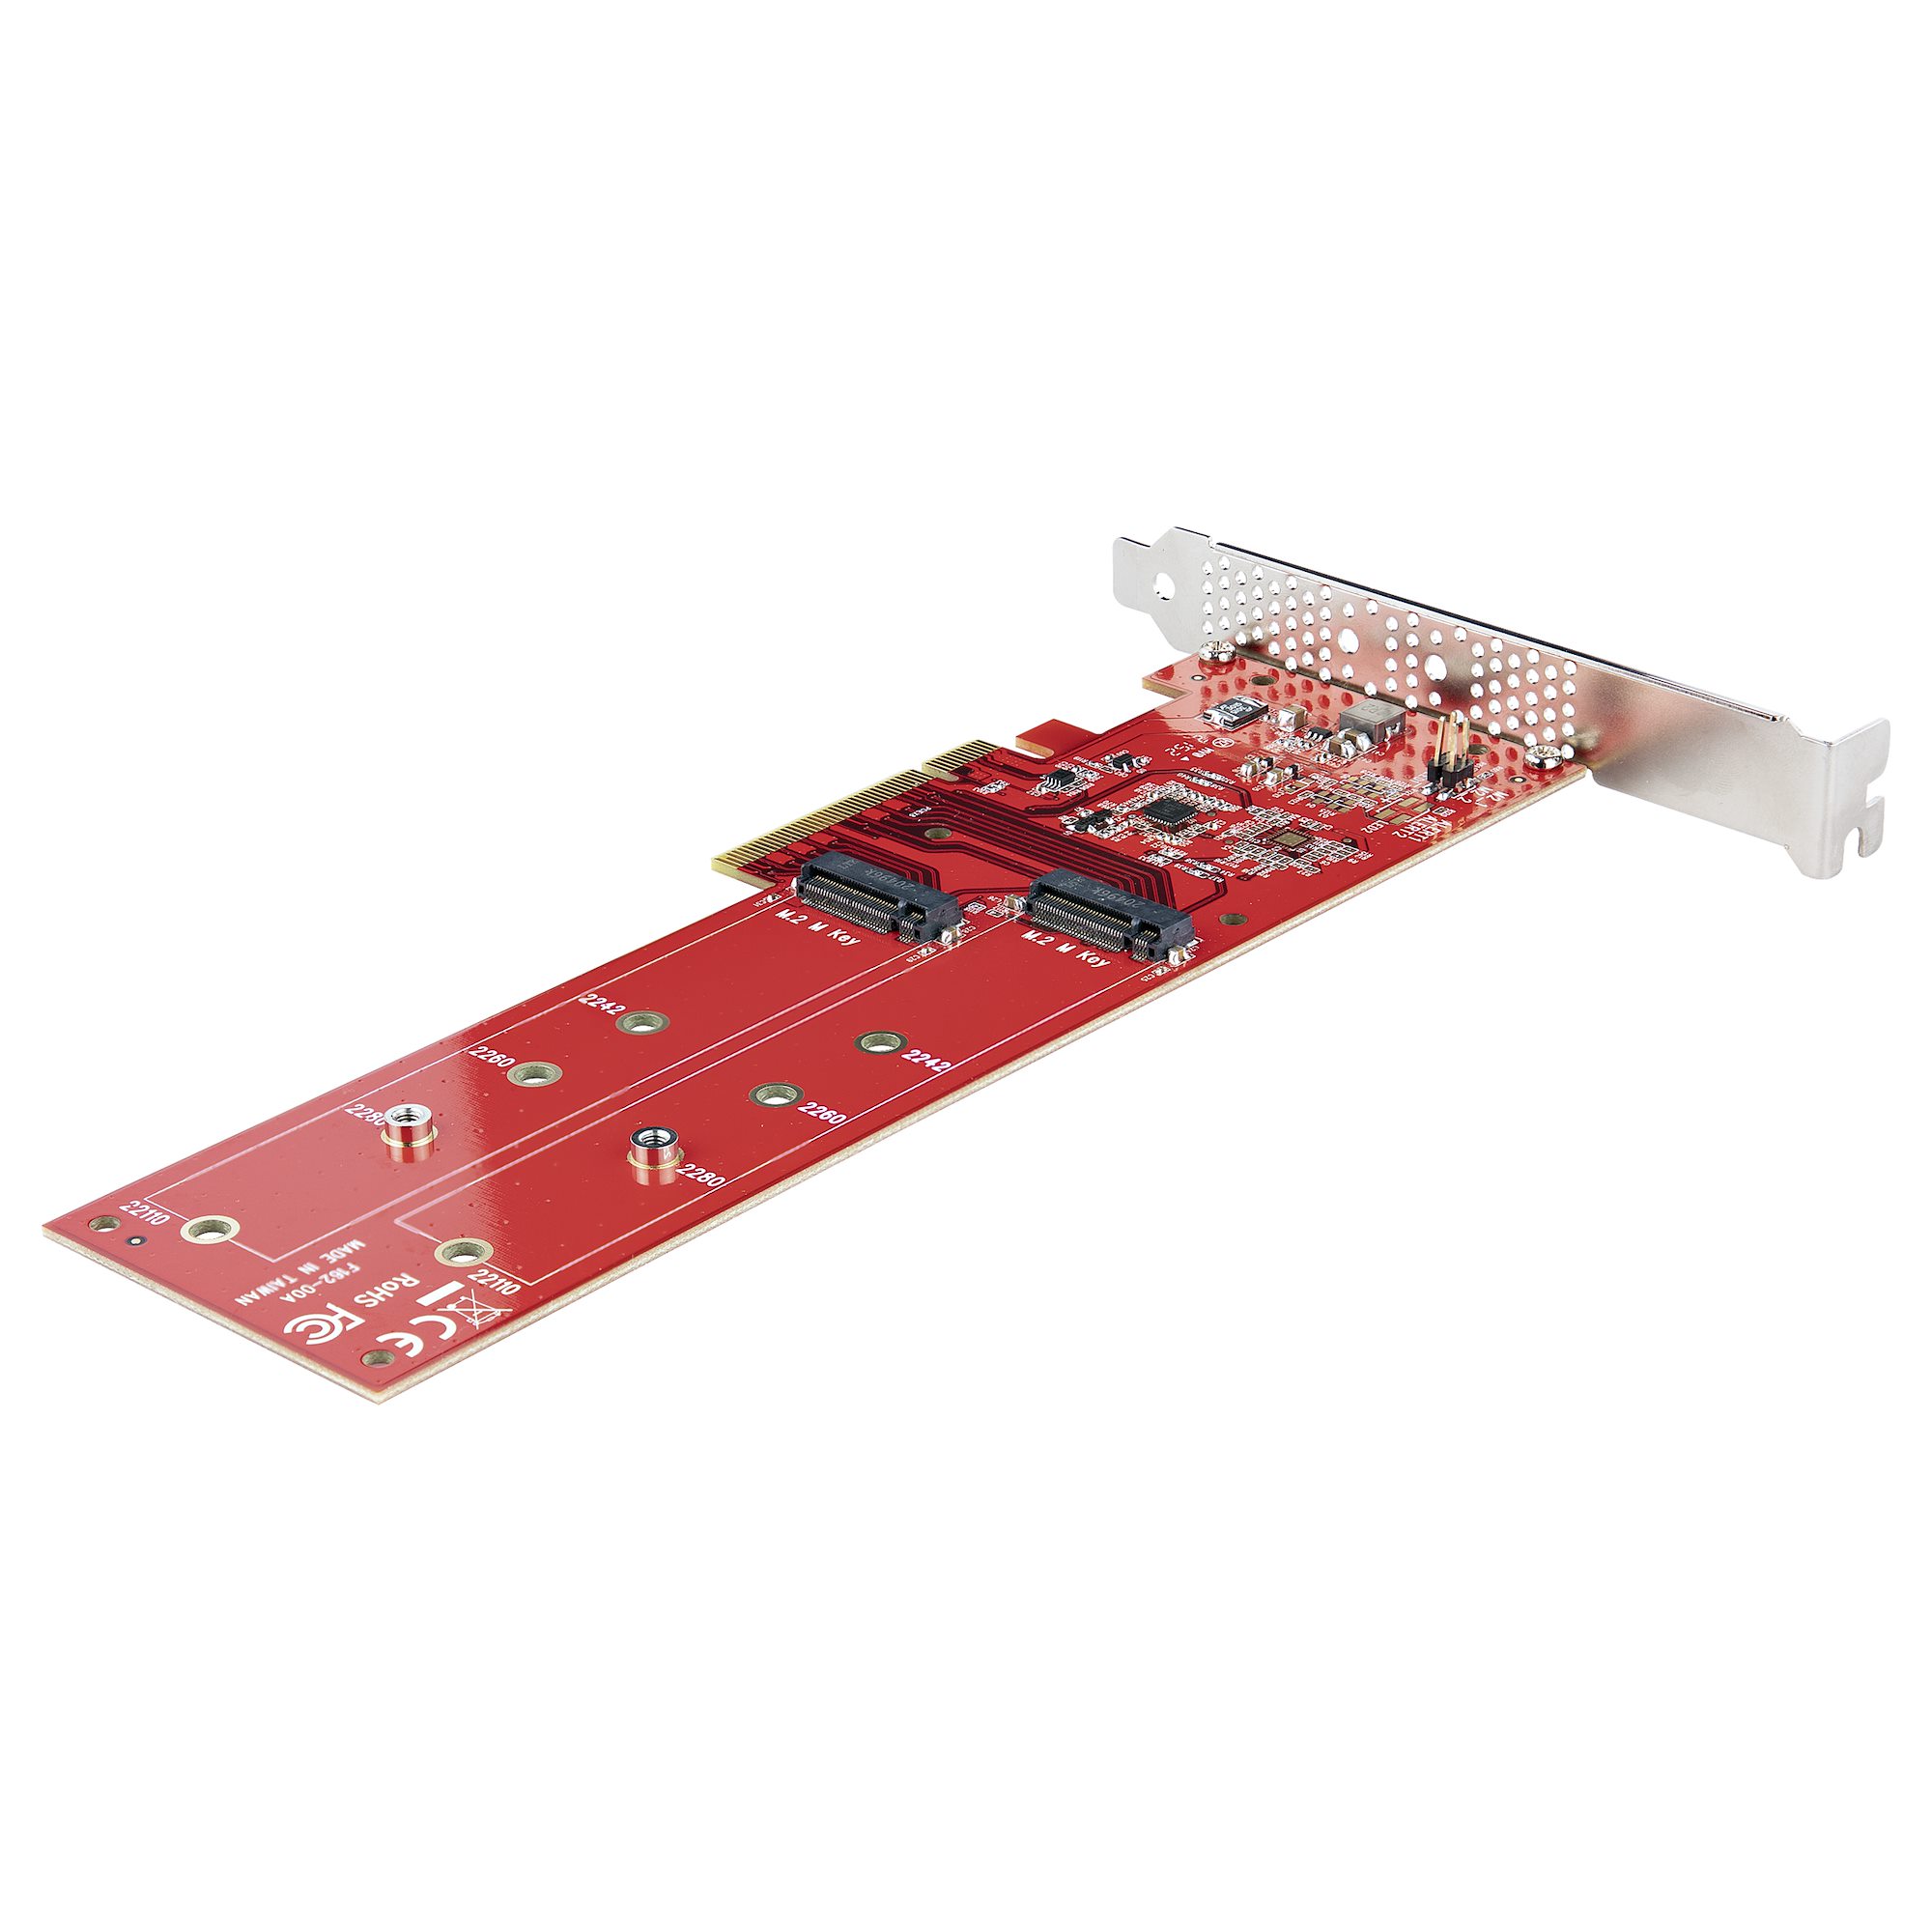 Dual M.2 PCIe SSD Adapter Card, PCIe x8 / x16 to Dual NVMe or AHCI M.2  SSDs, PCI Express 4.0, 7.8GBps/Drive, Bifurcation Required - Windows/Linux 